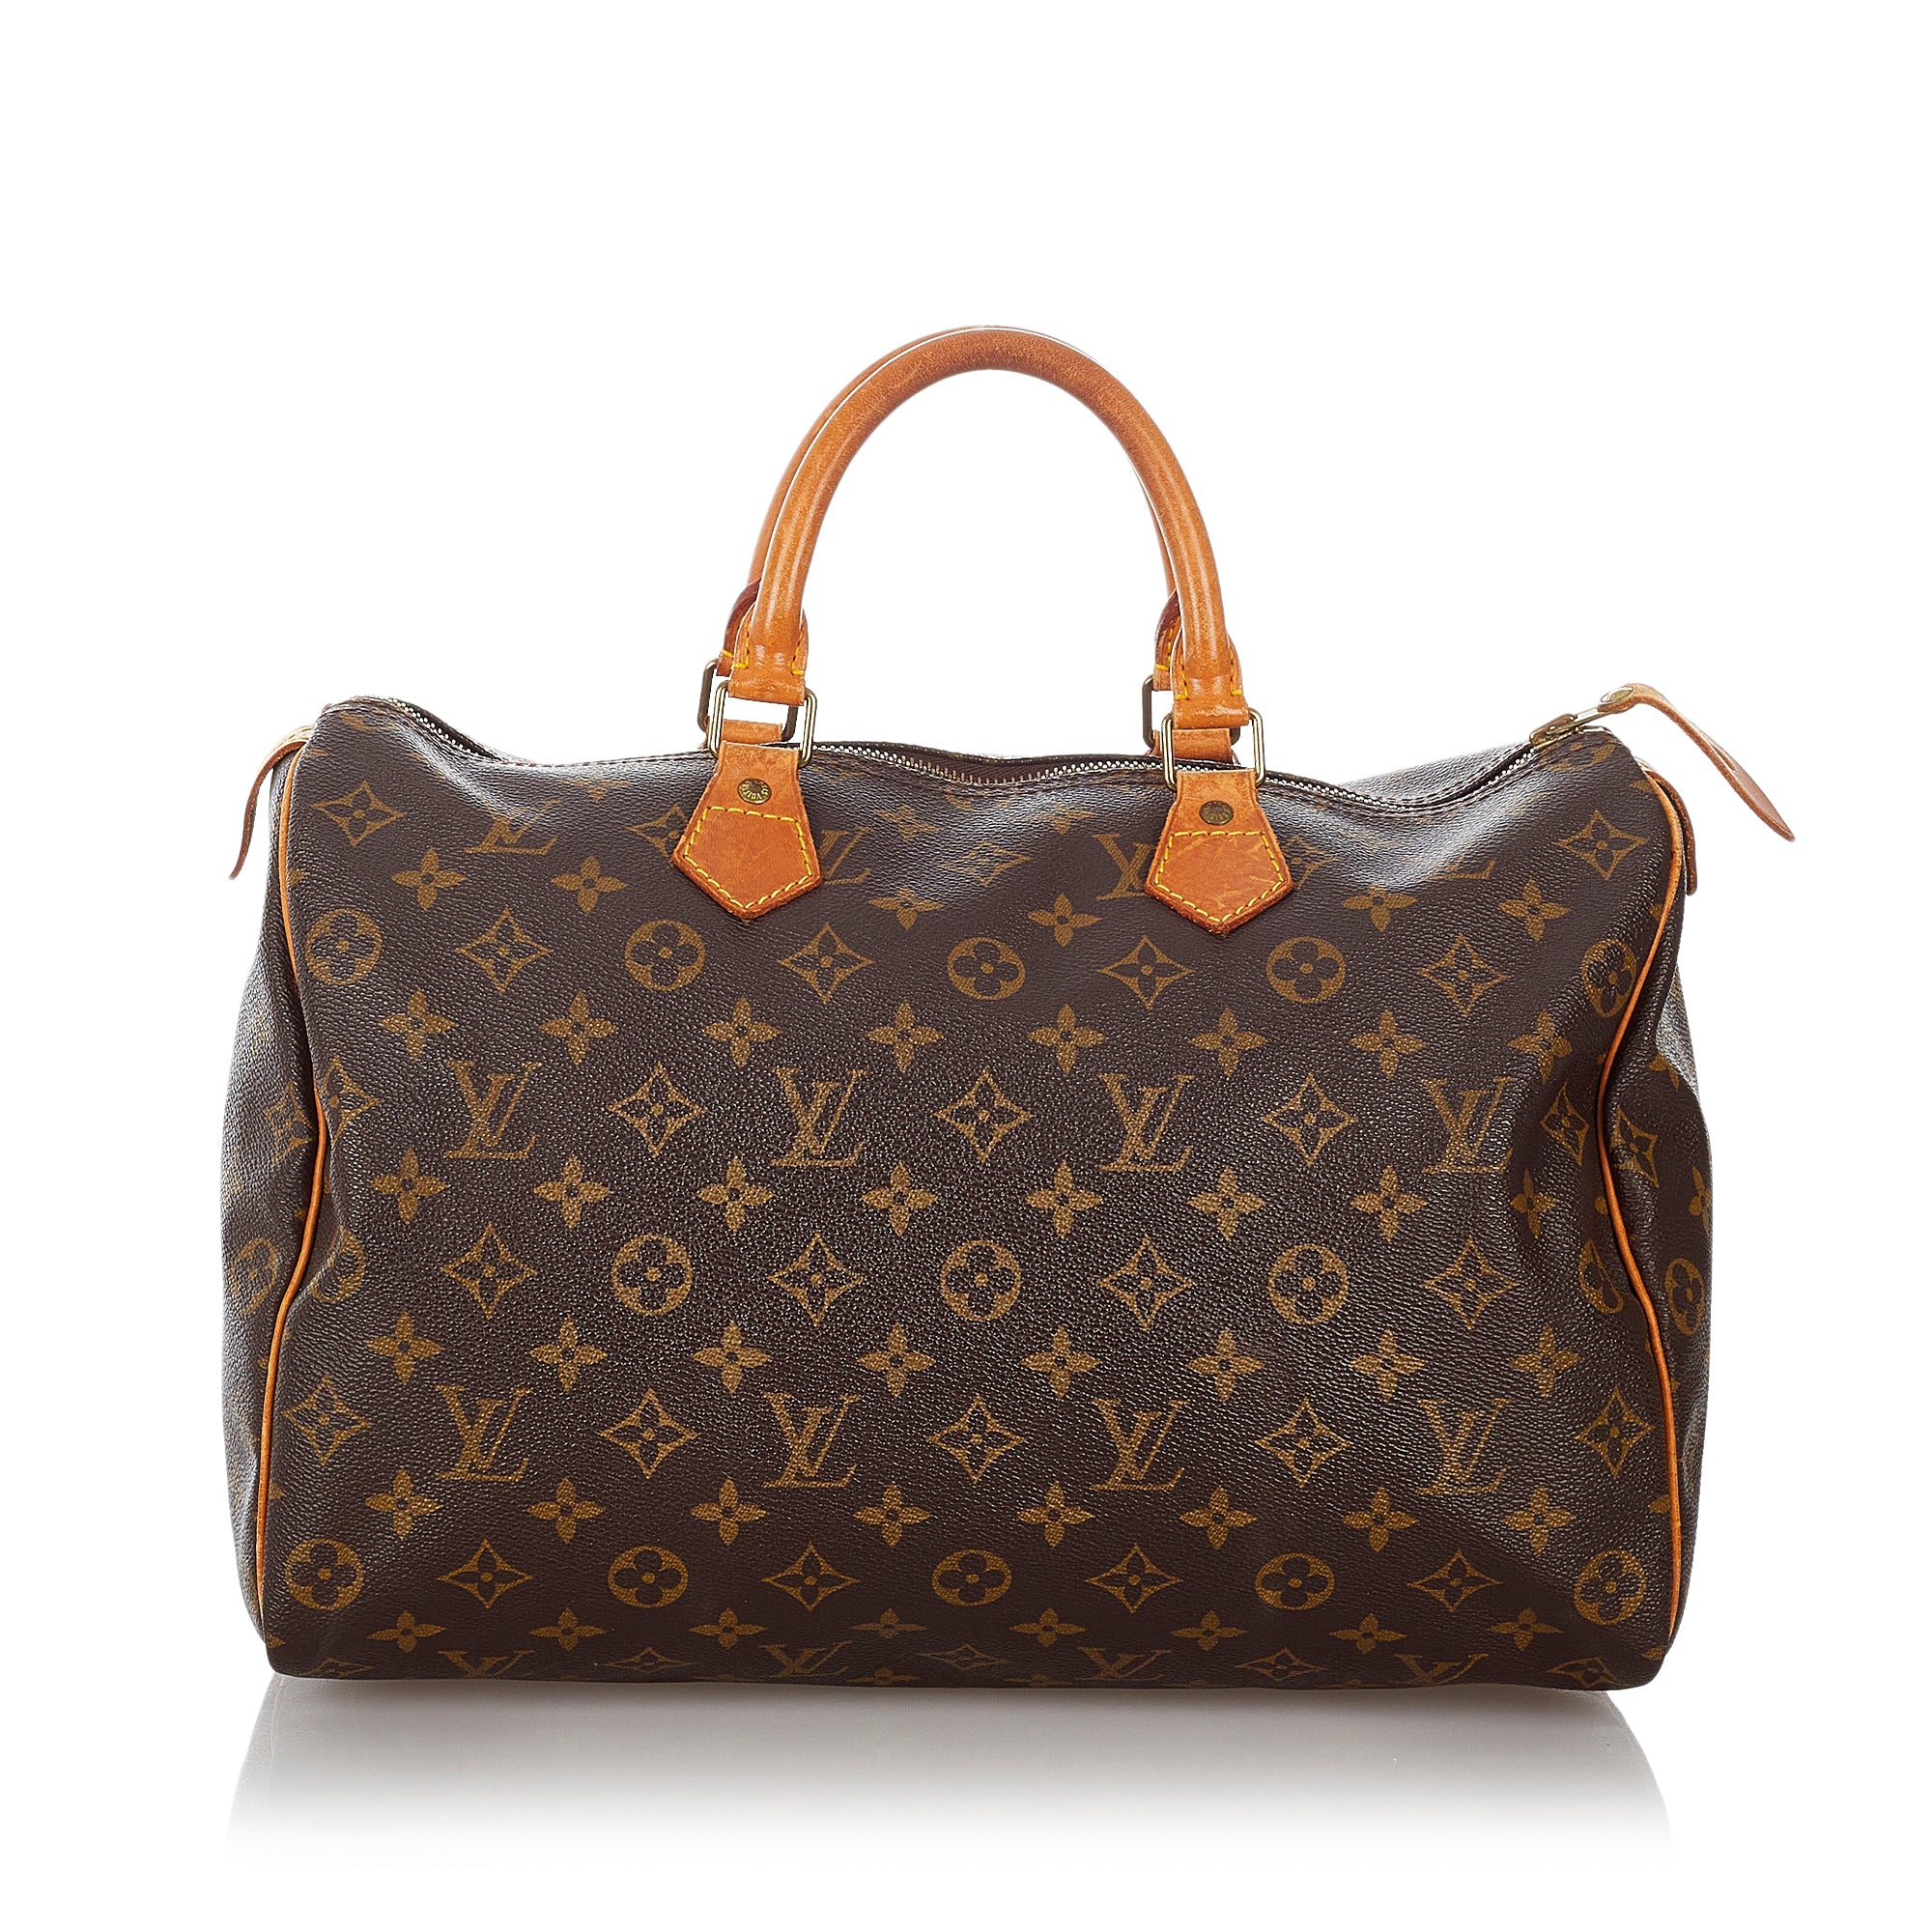 Louis Vuitton 2006 pre-owned Monogram Perforated Musette Shoulder Bag -  Farfetch